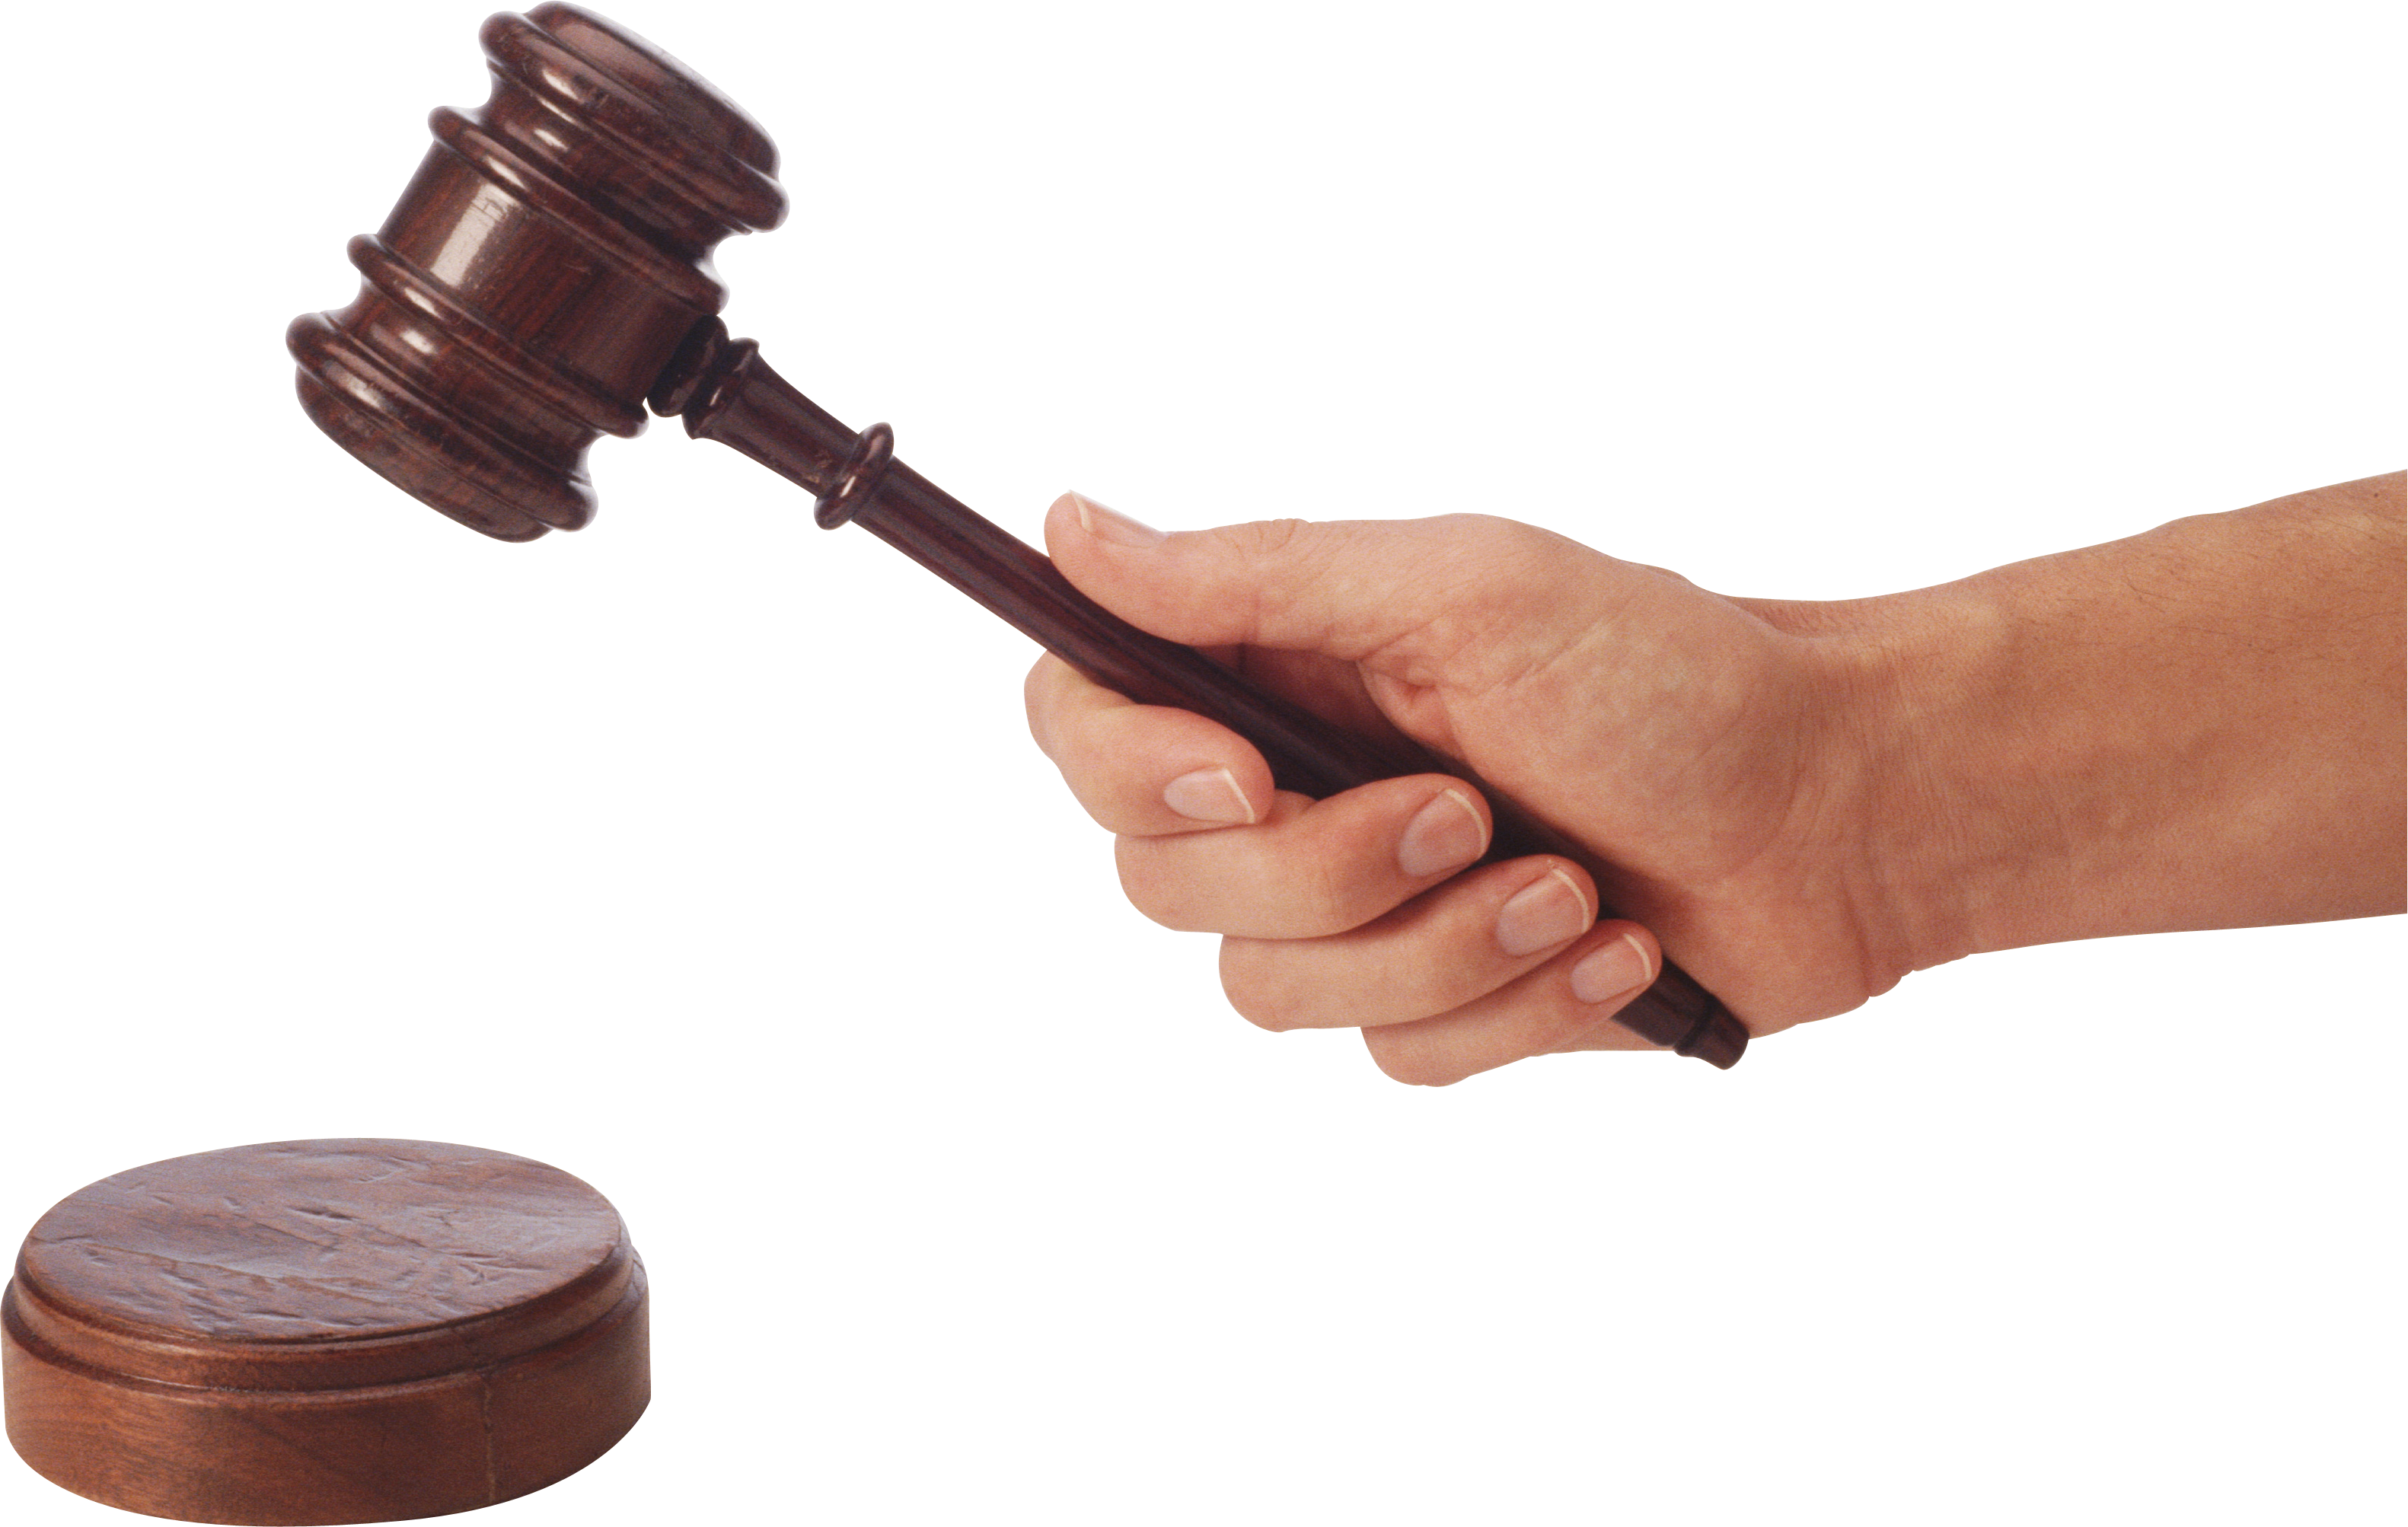 Gavel Judge Hammer in hand PNG Image.